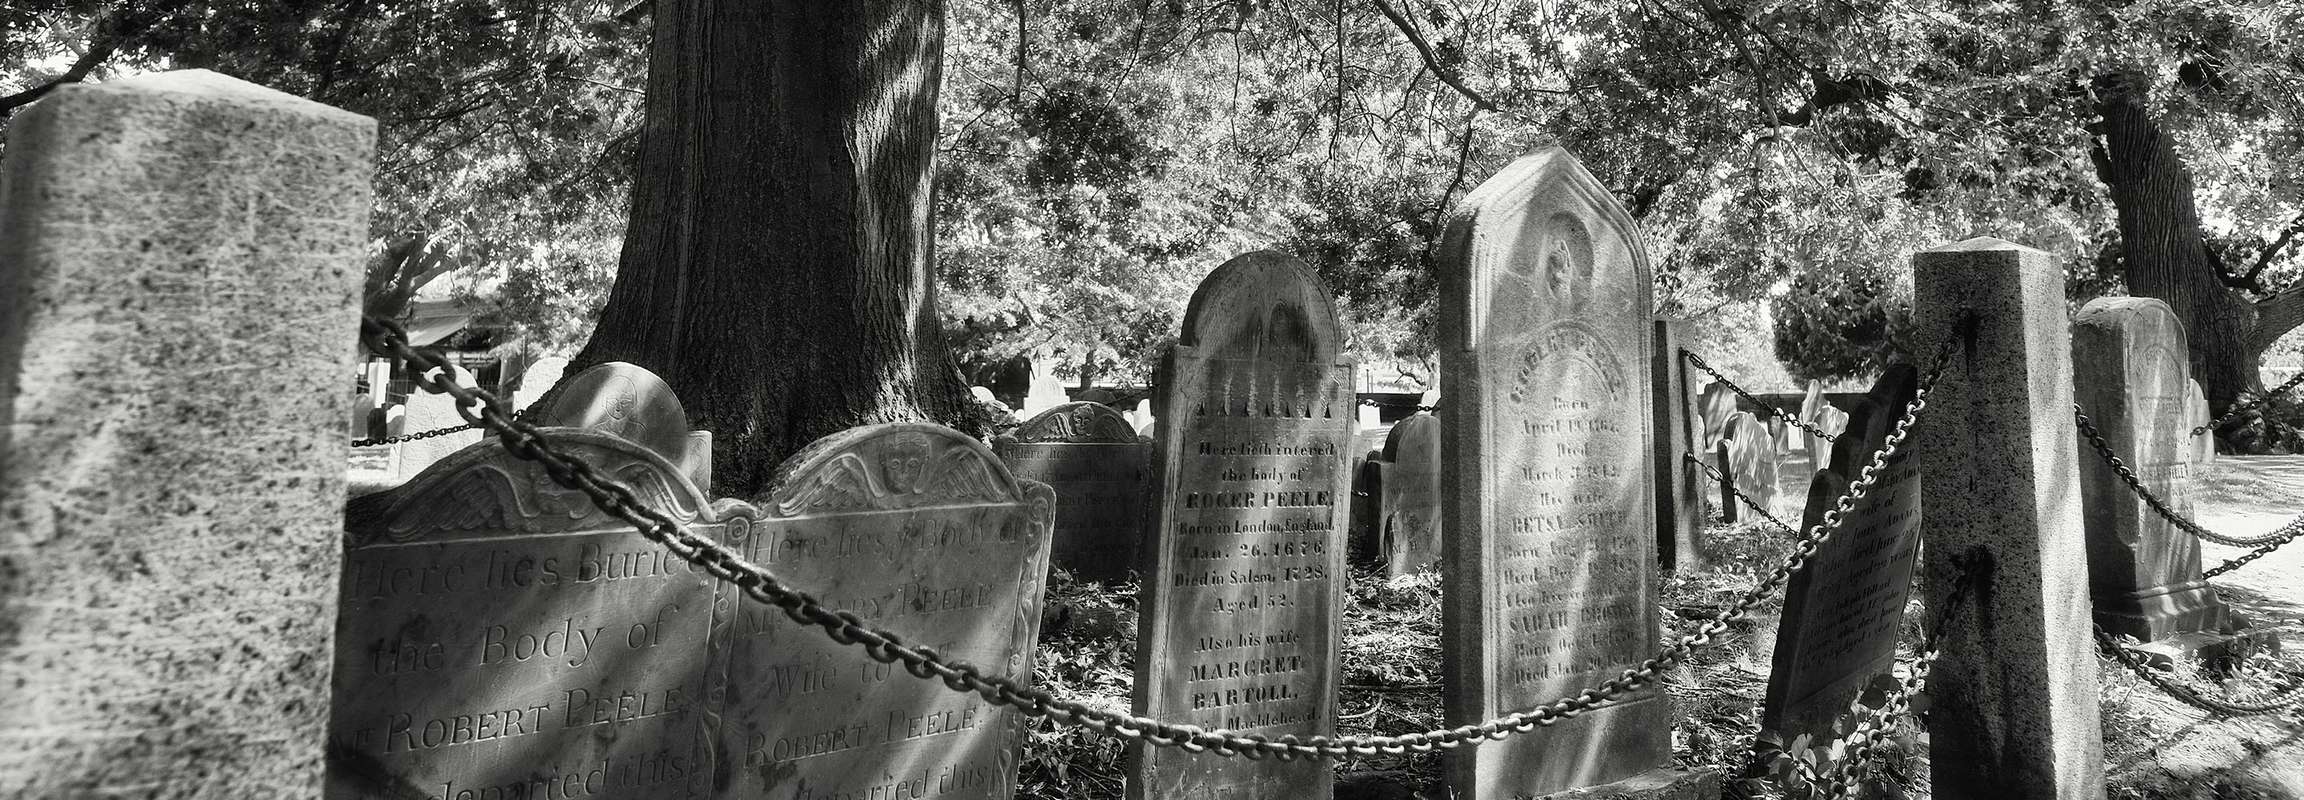 The Old Burying Point Cemetery, in Salem Massachusetts